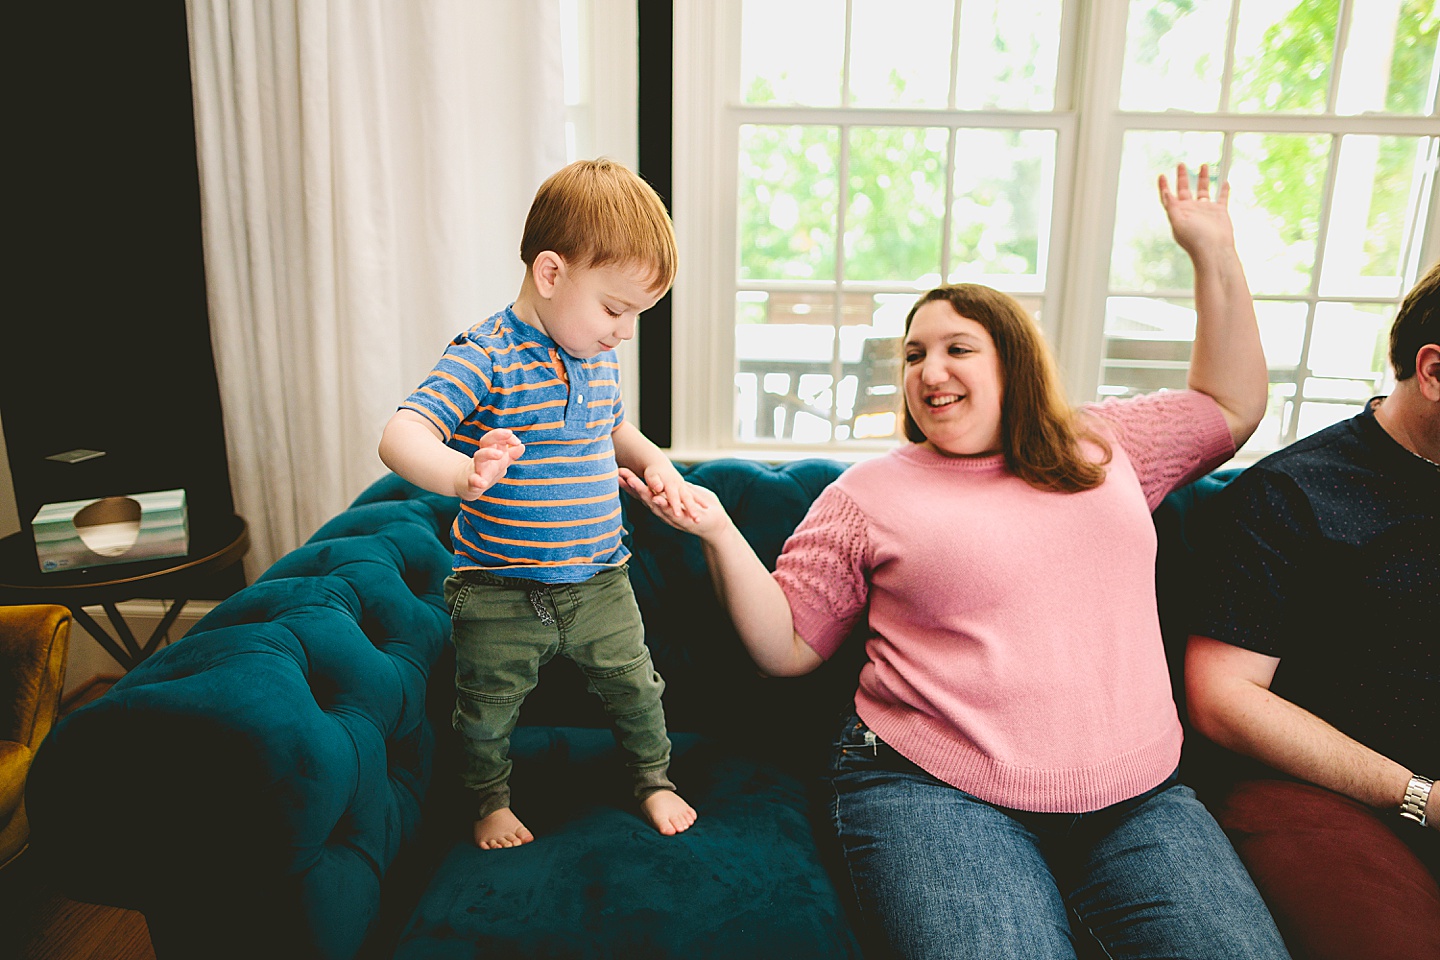 Son dancing with his mom on the couch